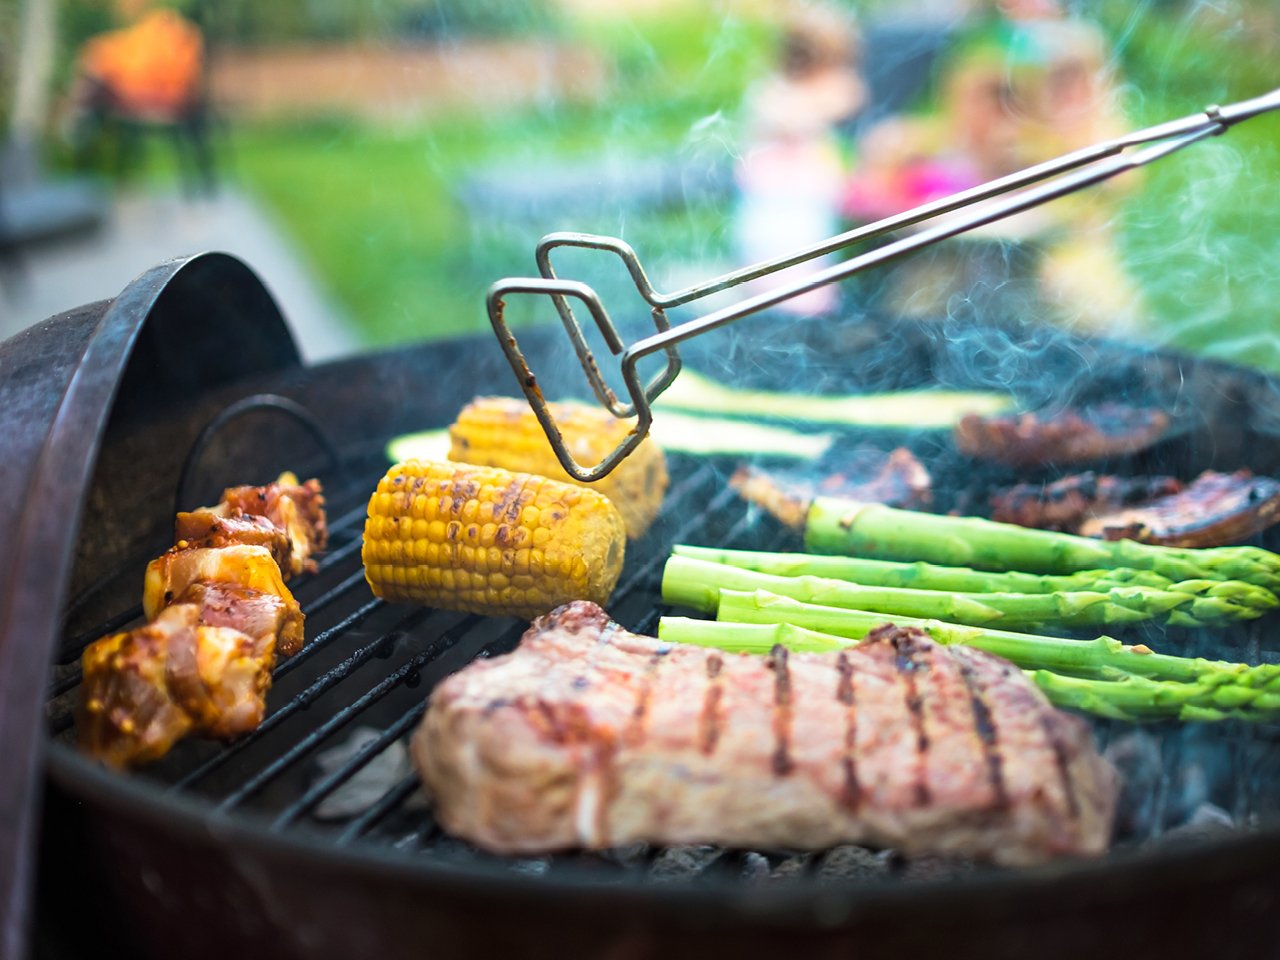 A pair of silver tongs suspended over an open black grill with various meats and vegetables grilling.